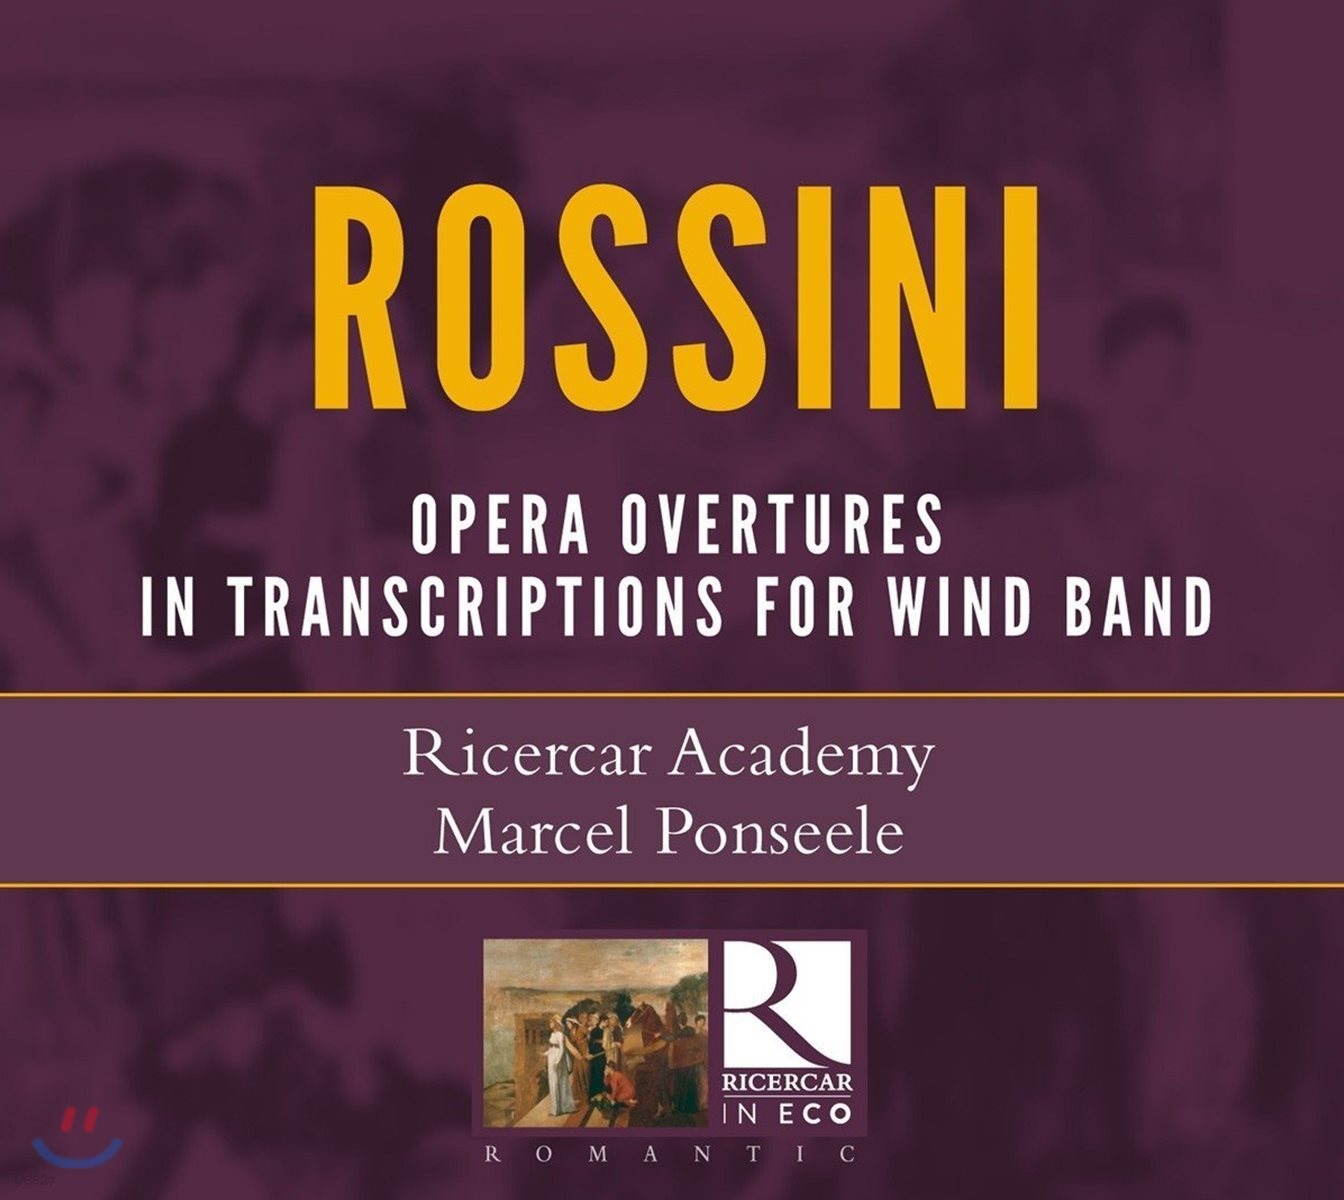 Marcel Ponseele 로시니: 오페라 서곡집 - 목관 앙상블 버전 (Rossini: Opera Overtures in Transcriptions for Wind Band)